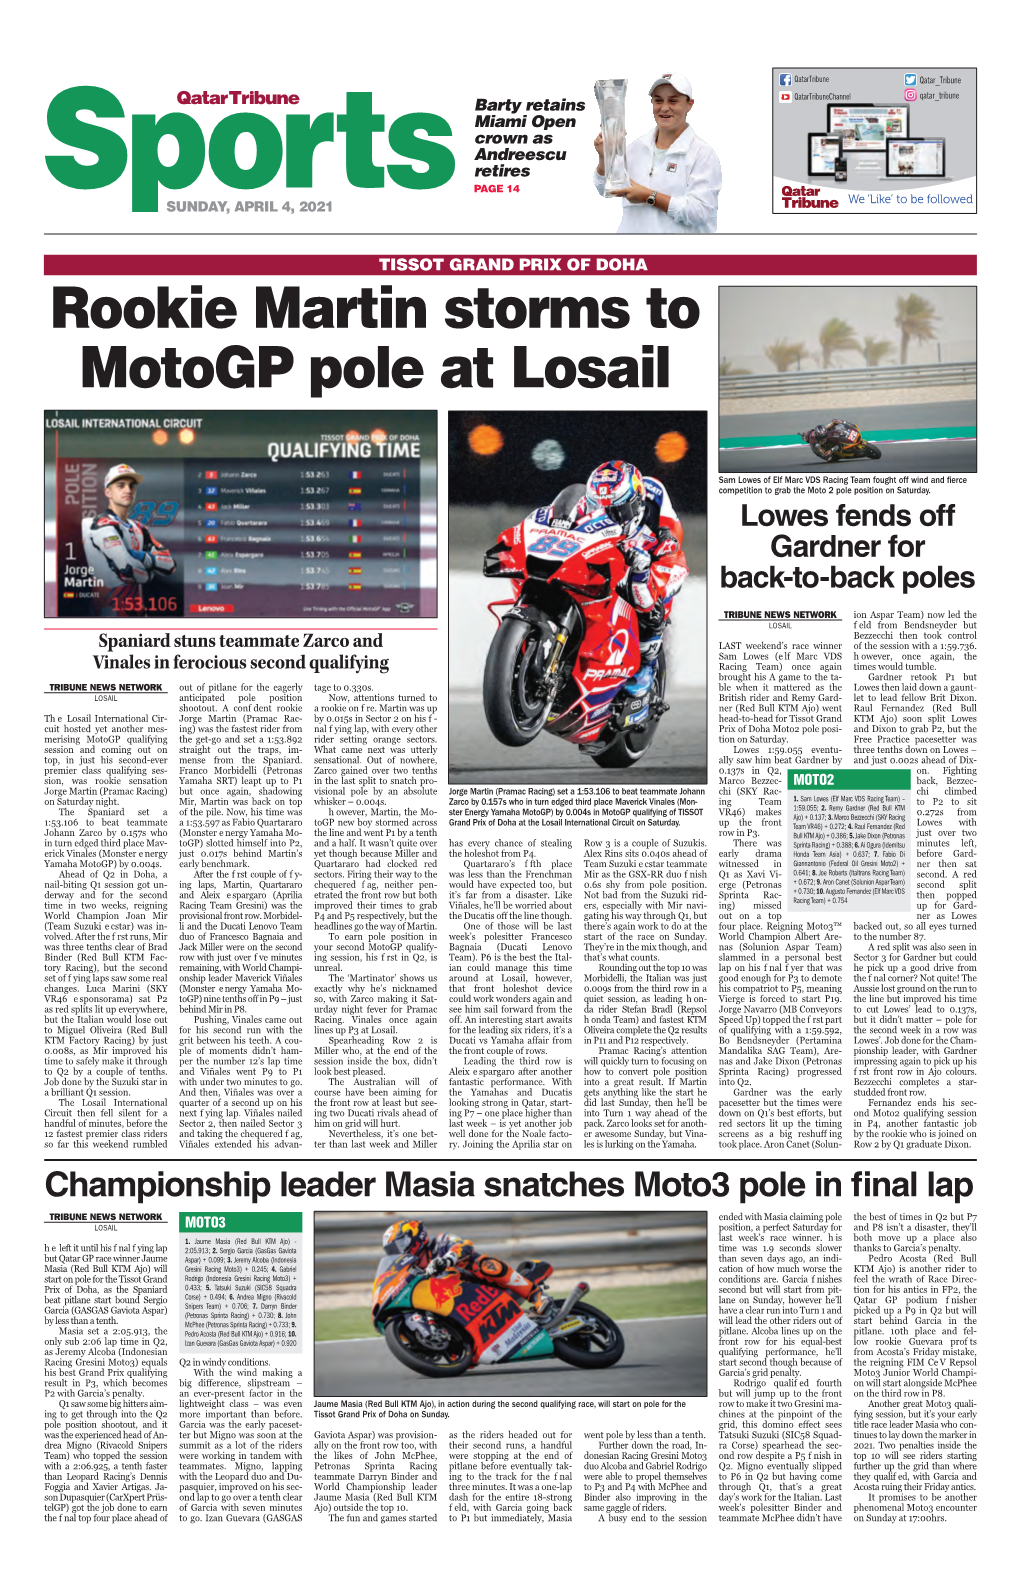 Rookie Martin Storms to Motogp Pole at Losail